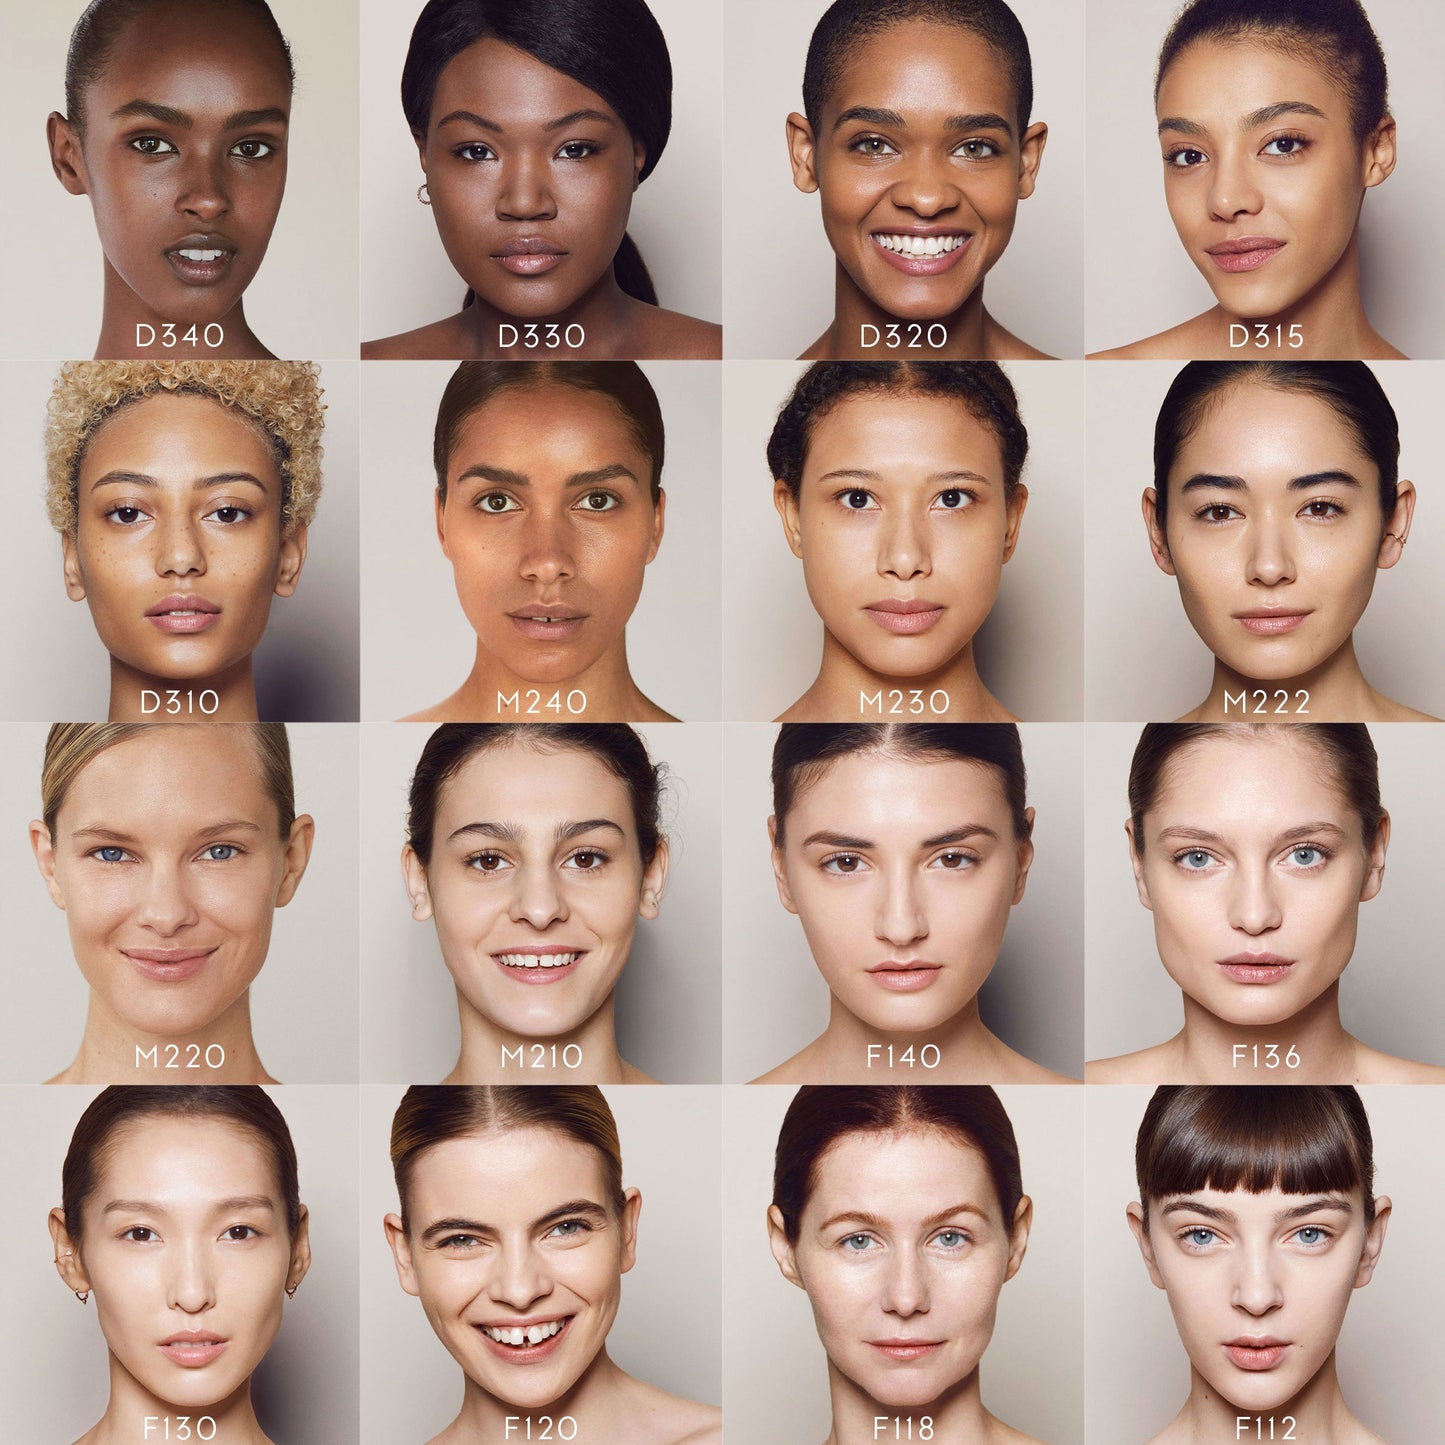 Close ups of various faces of different skin tones, from dark to light with the foundation shades they are wearing. F136 is the fifth-lightest shade shown. 